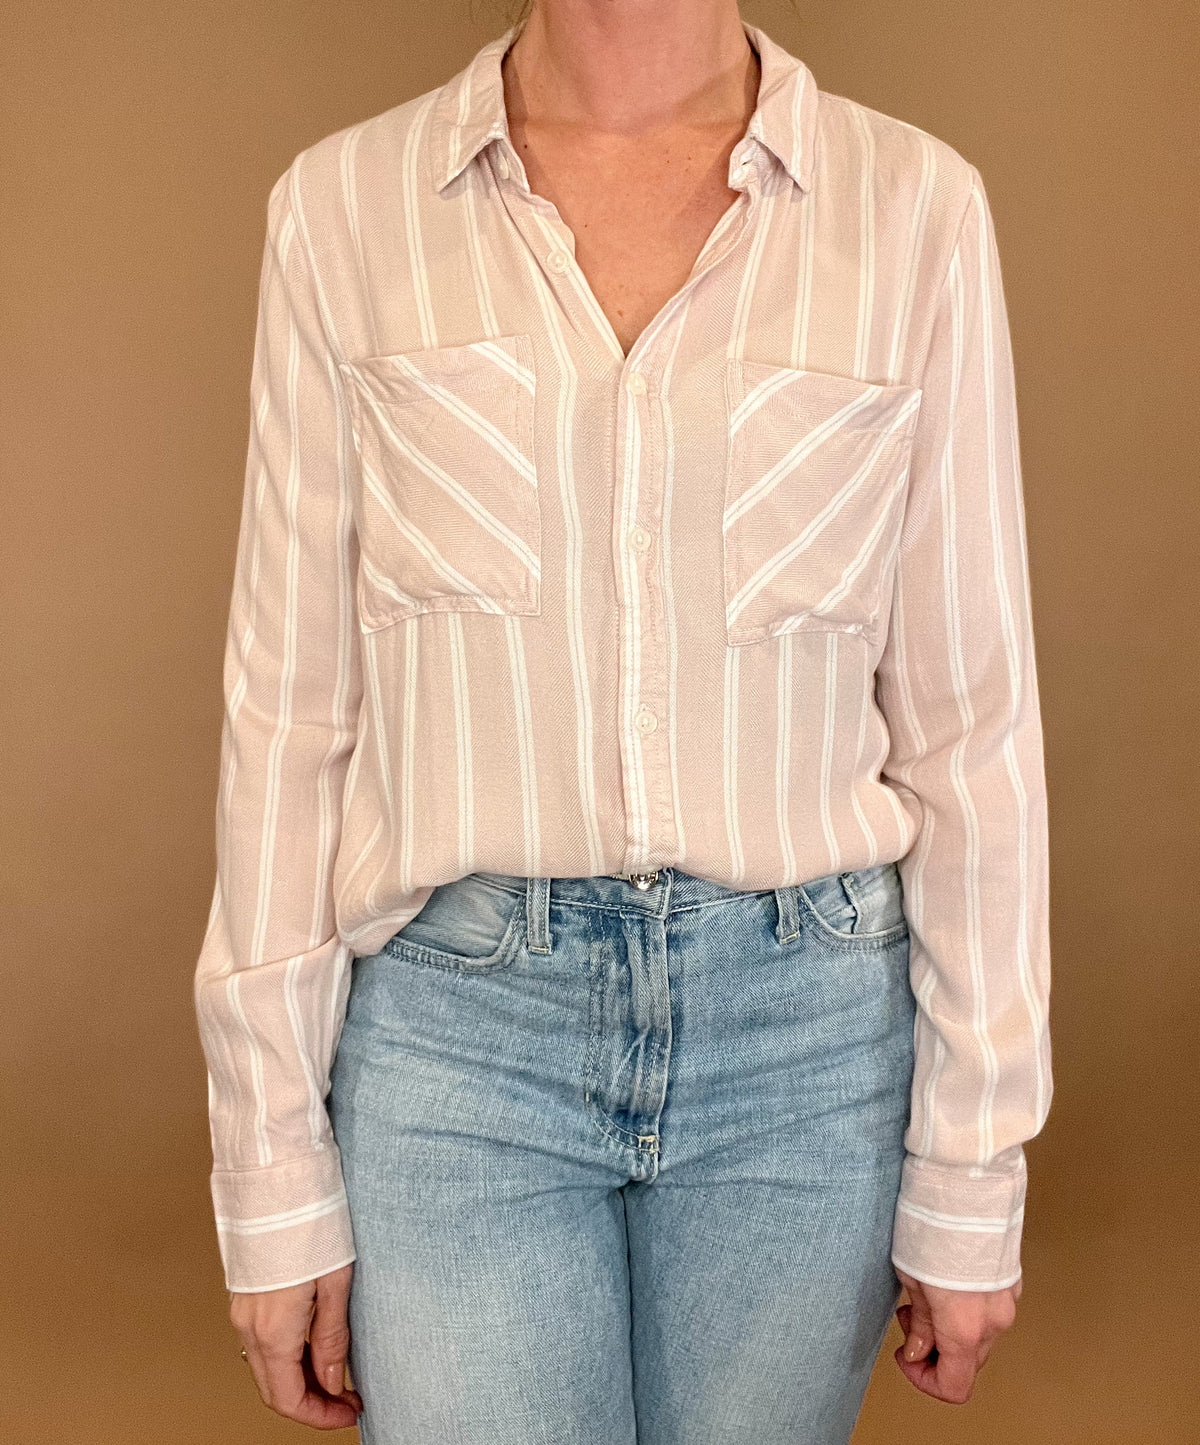 Introducing the Bestie Shirt in Blush, your new companion for the spring and summer season. Made with a luxurious lyocell blend, this stylish striped shirt is versatile enough to pair with any casual denim and sandals. Let it be your go-to piece for effortless fashion.